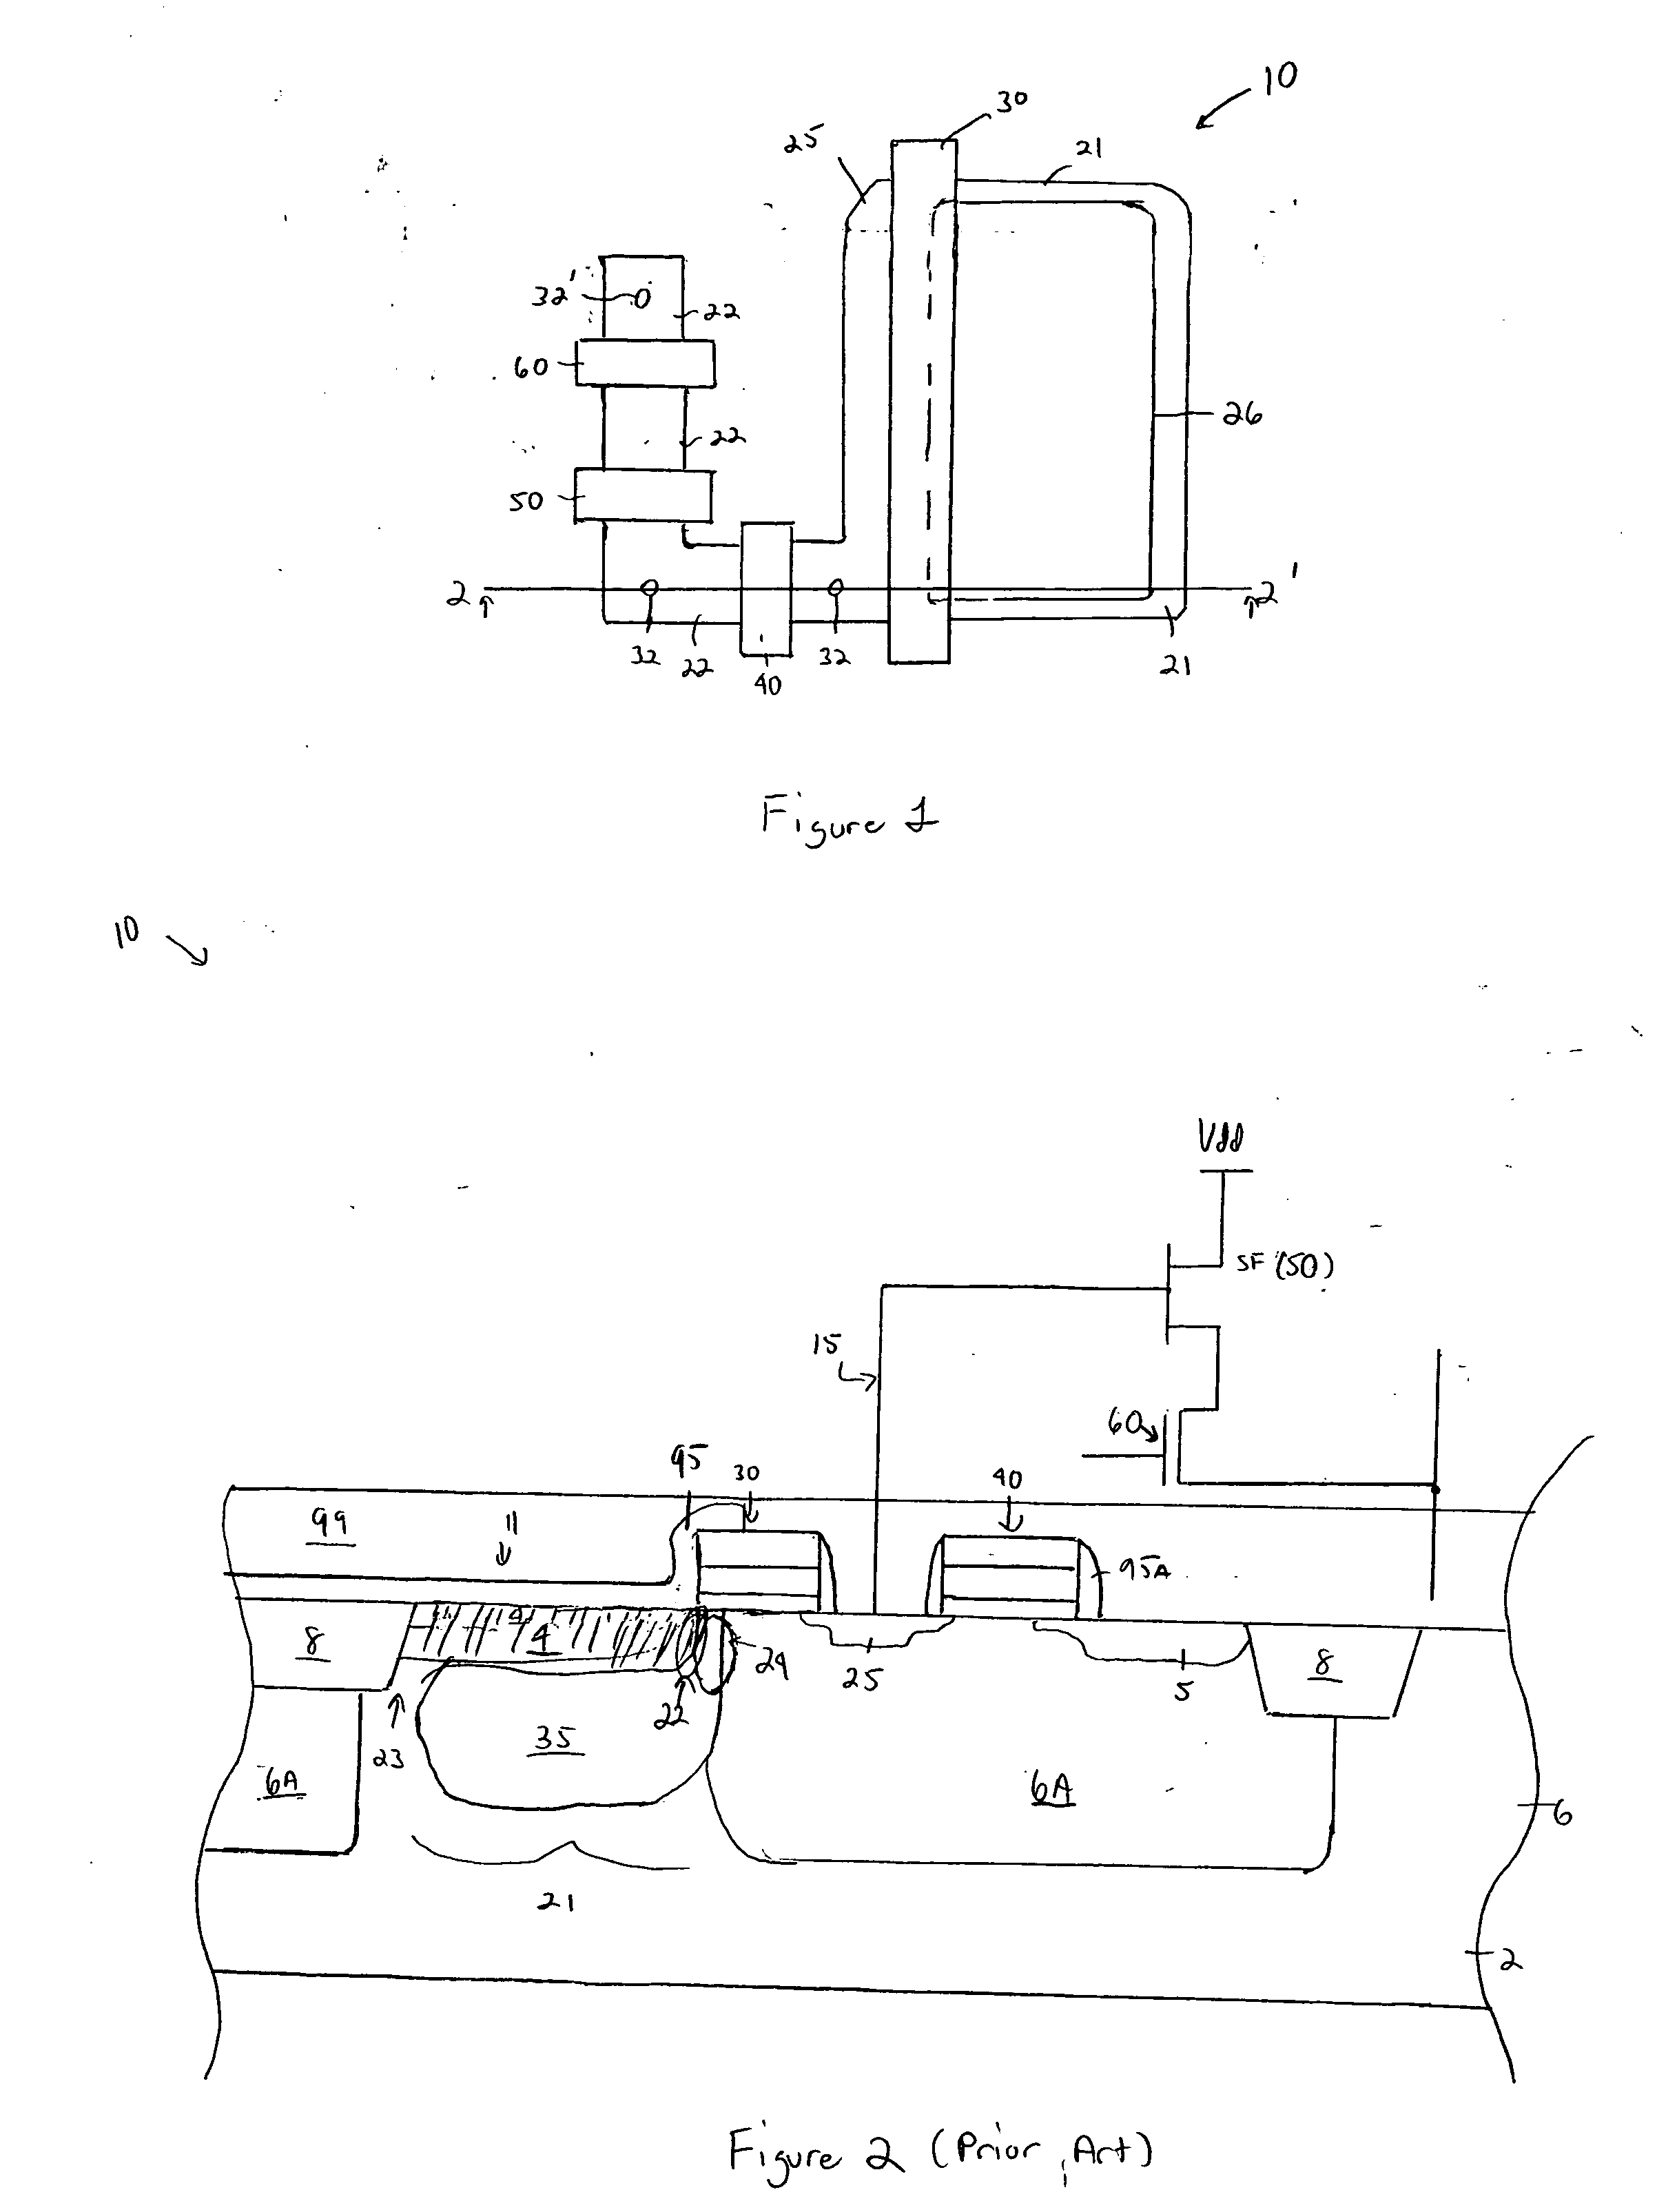 Pinned photodiode structure and method of formation